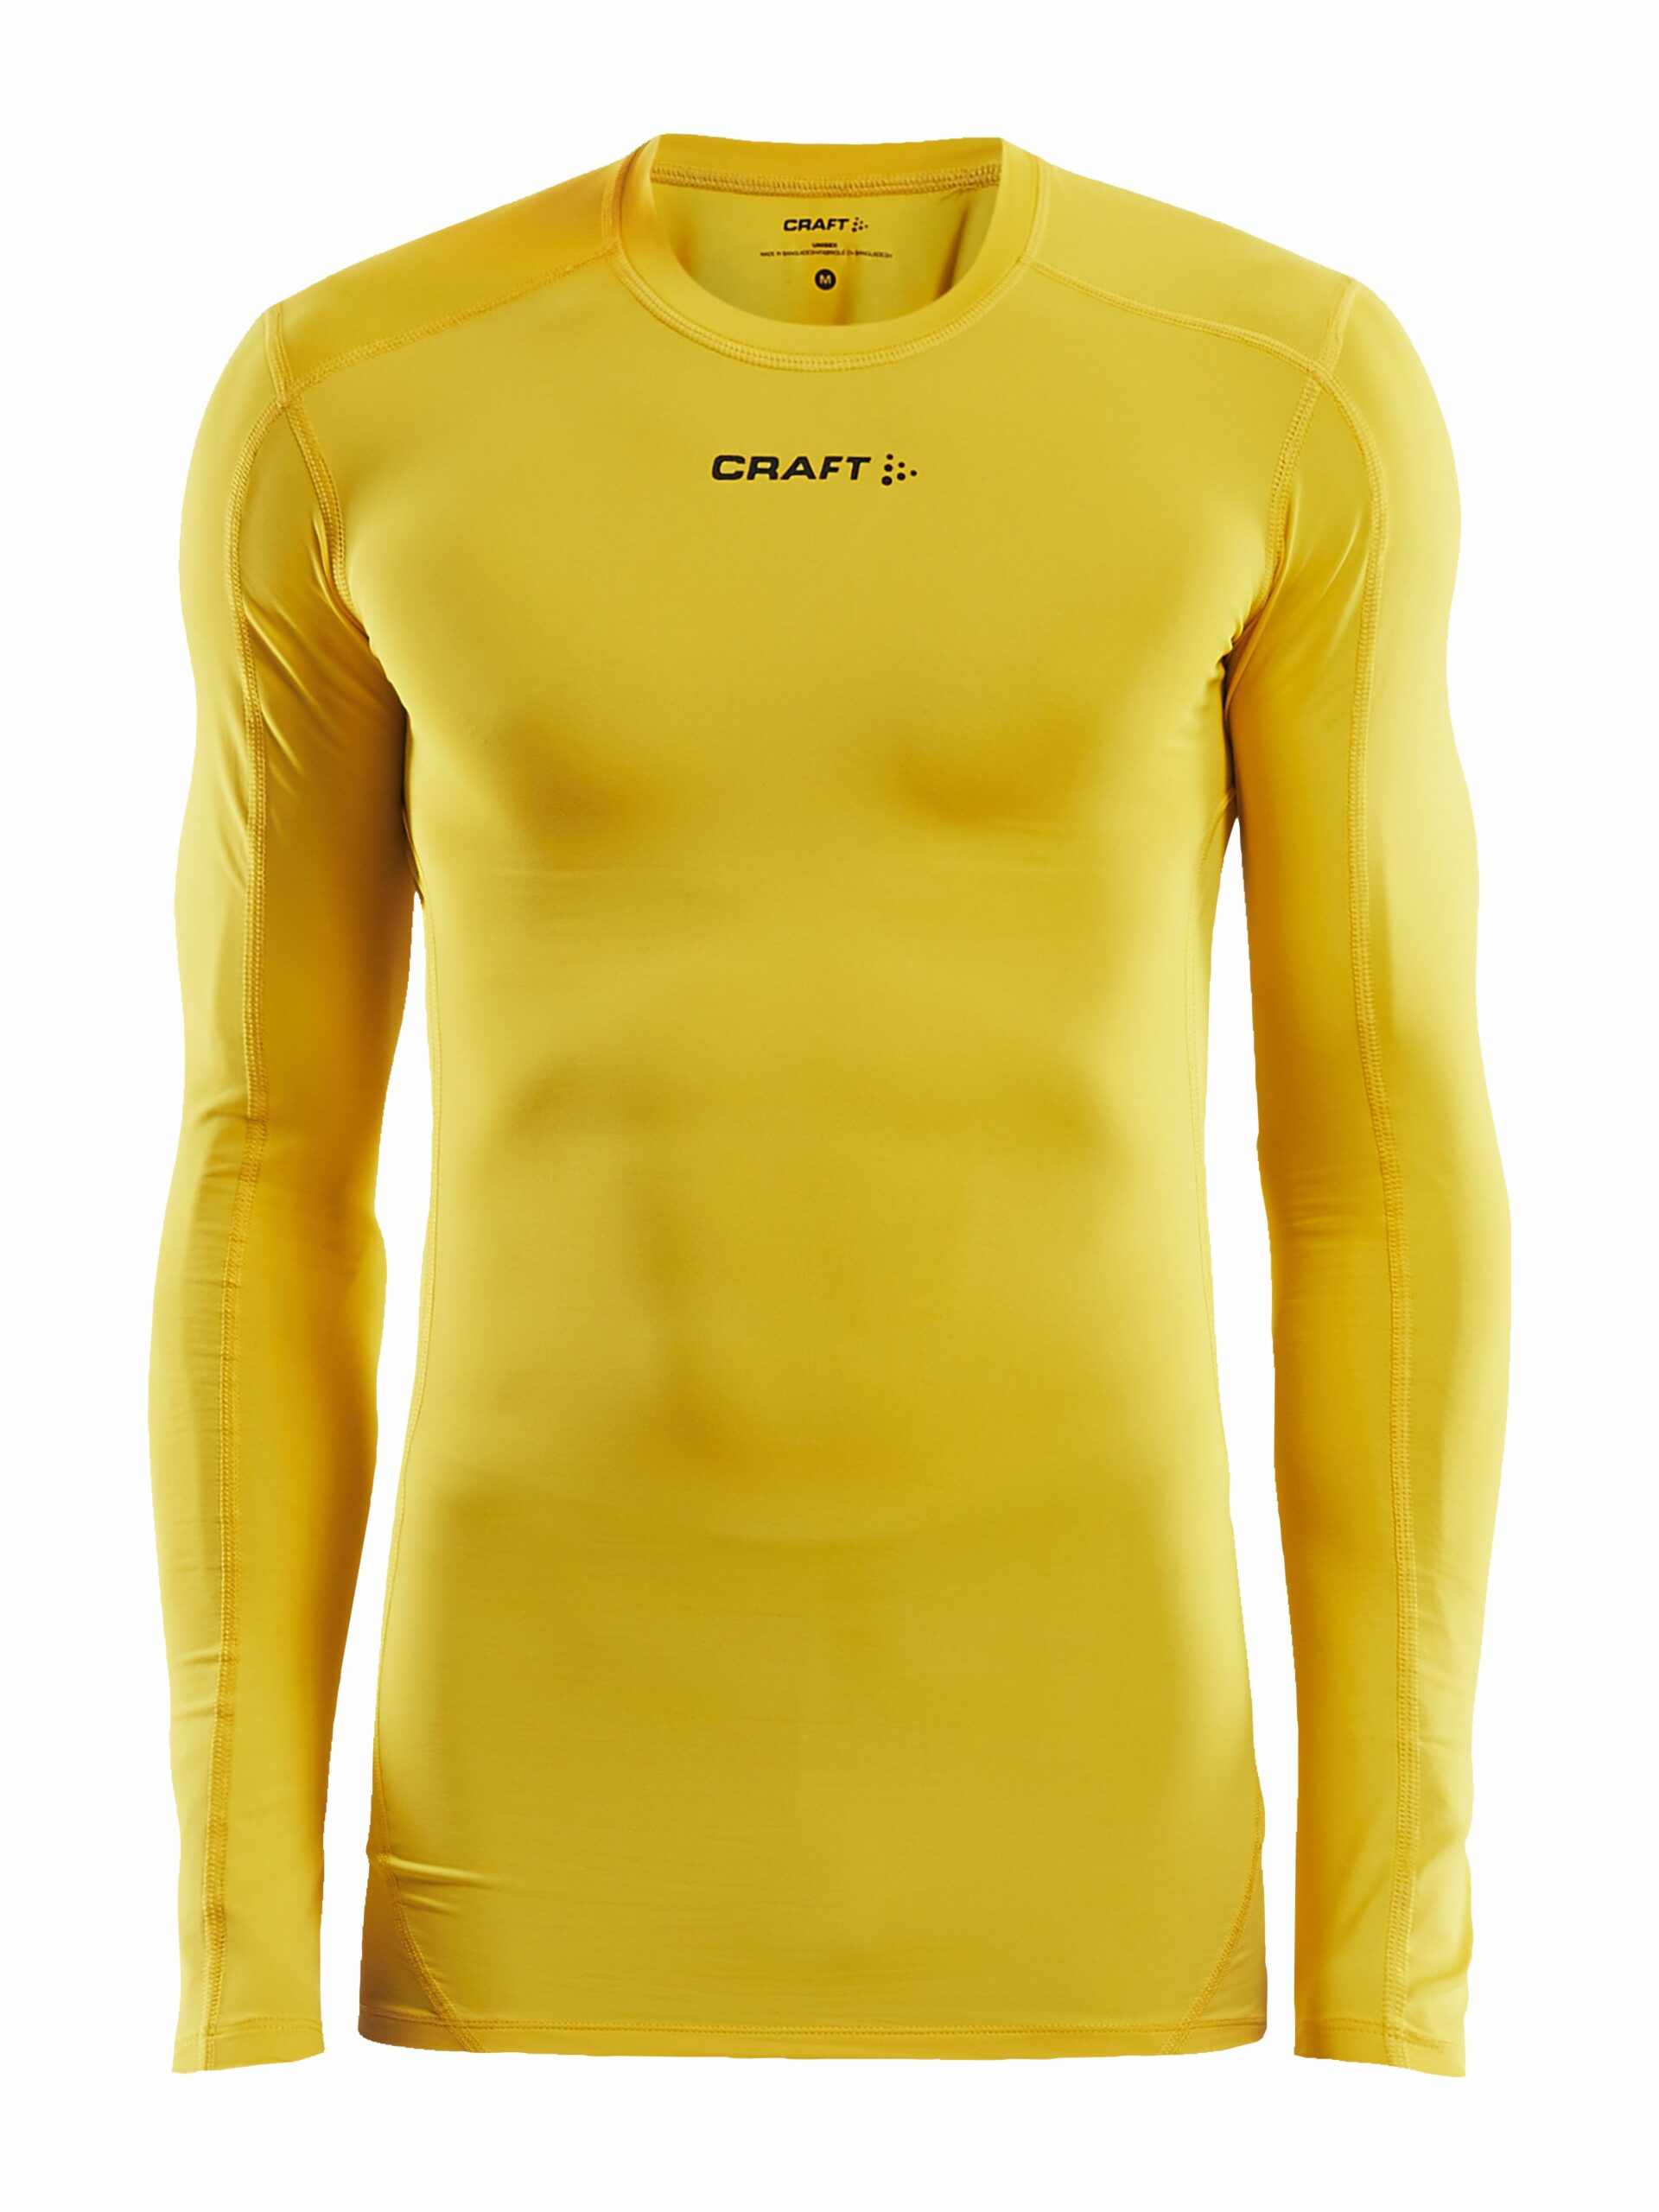 Craft - Pro Control Compression Long Sleeve Uni - Sweden Yellow S